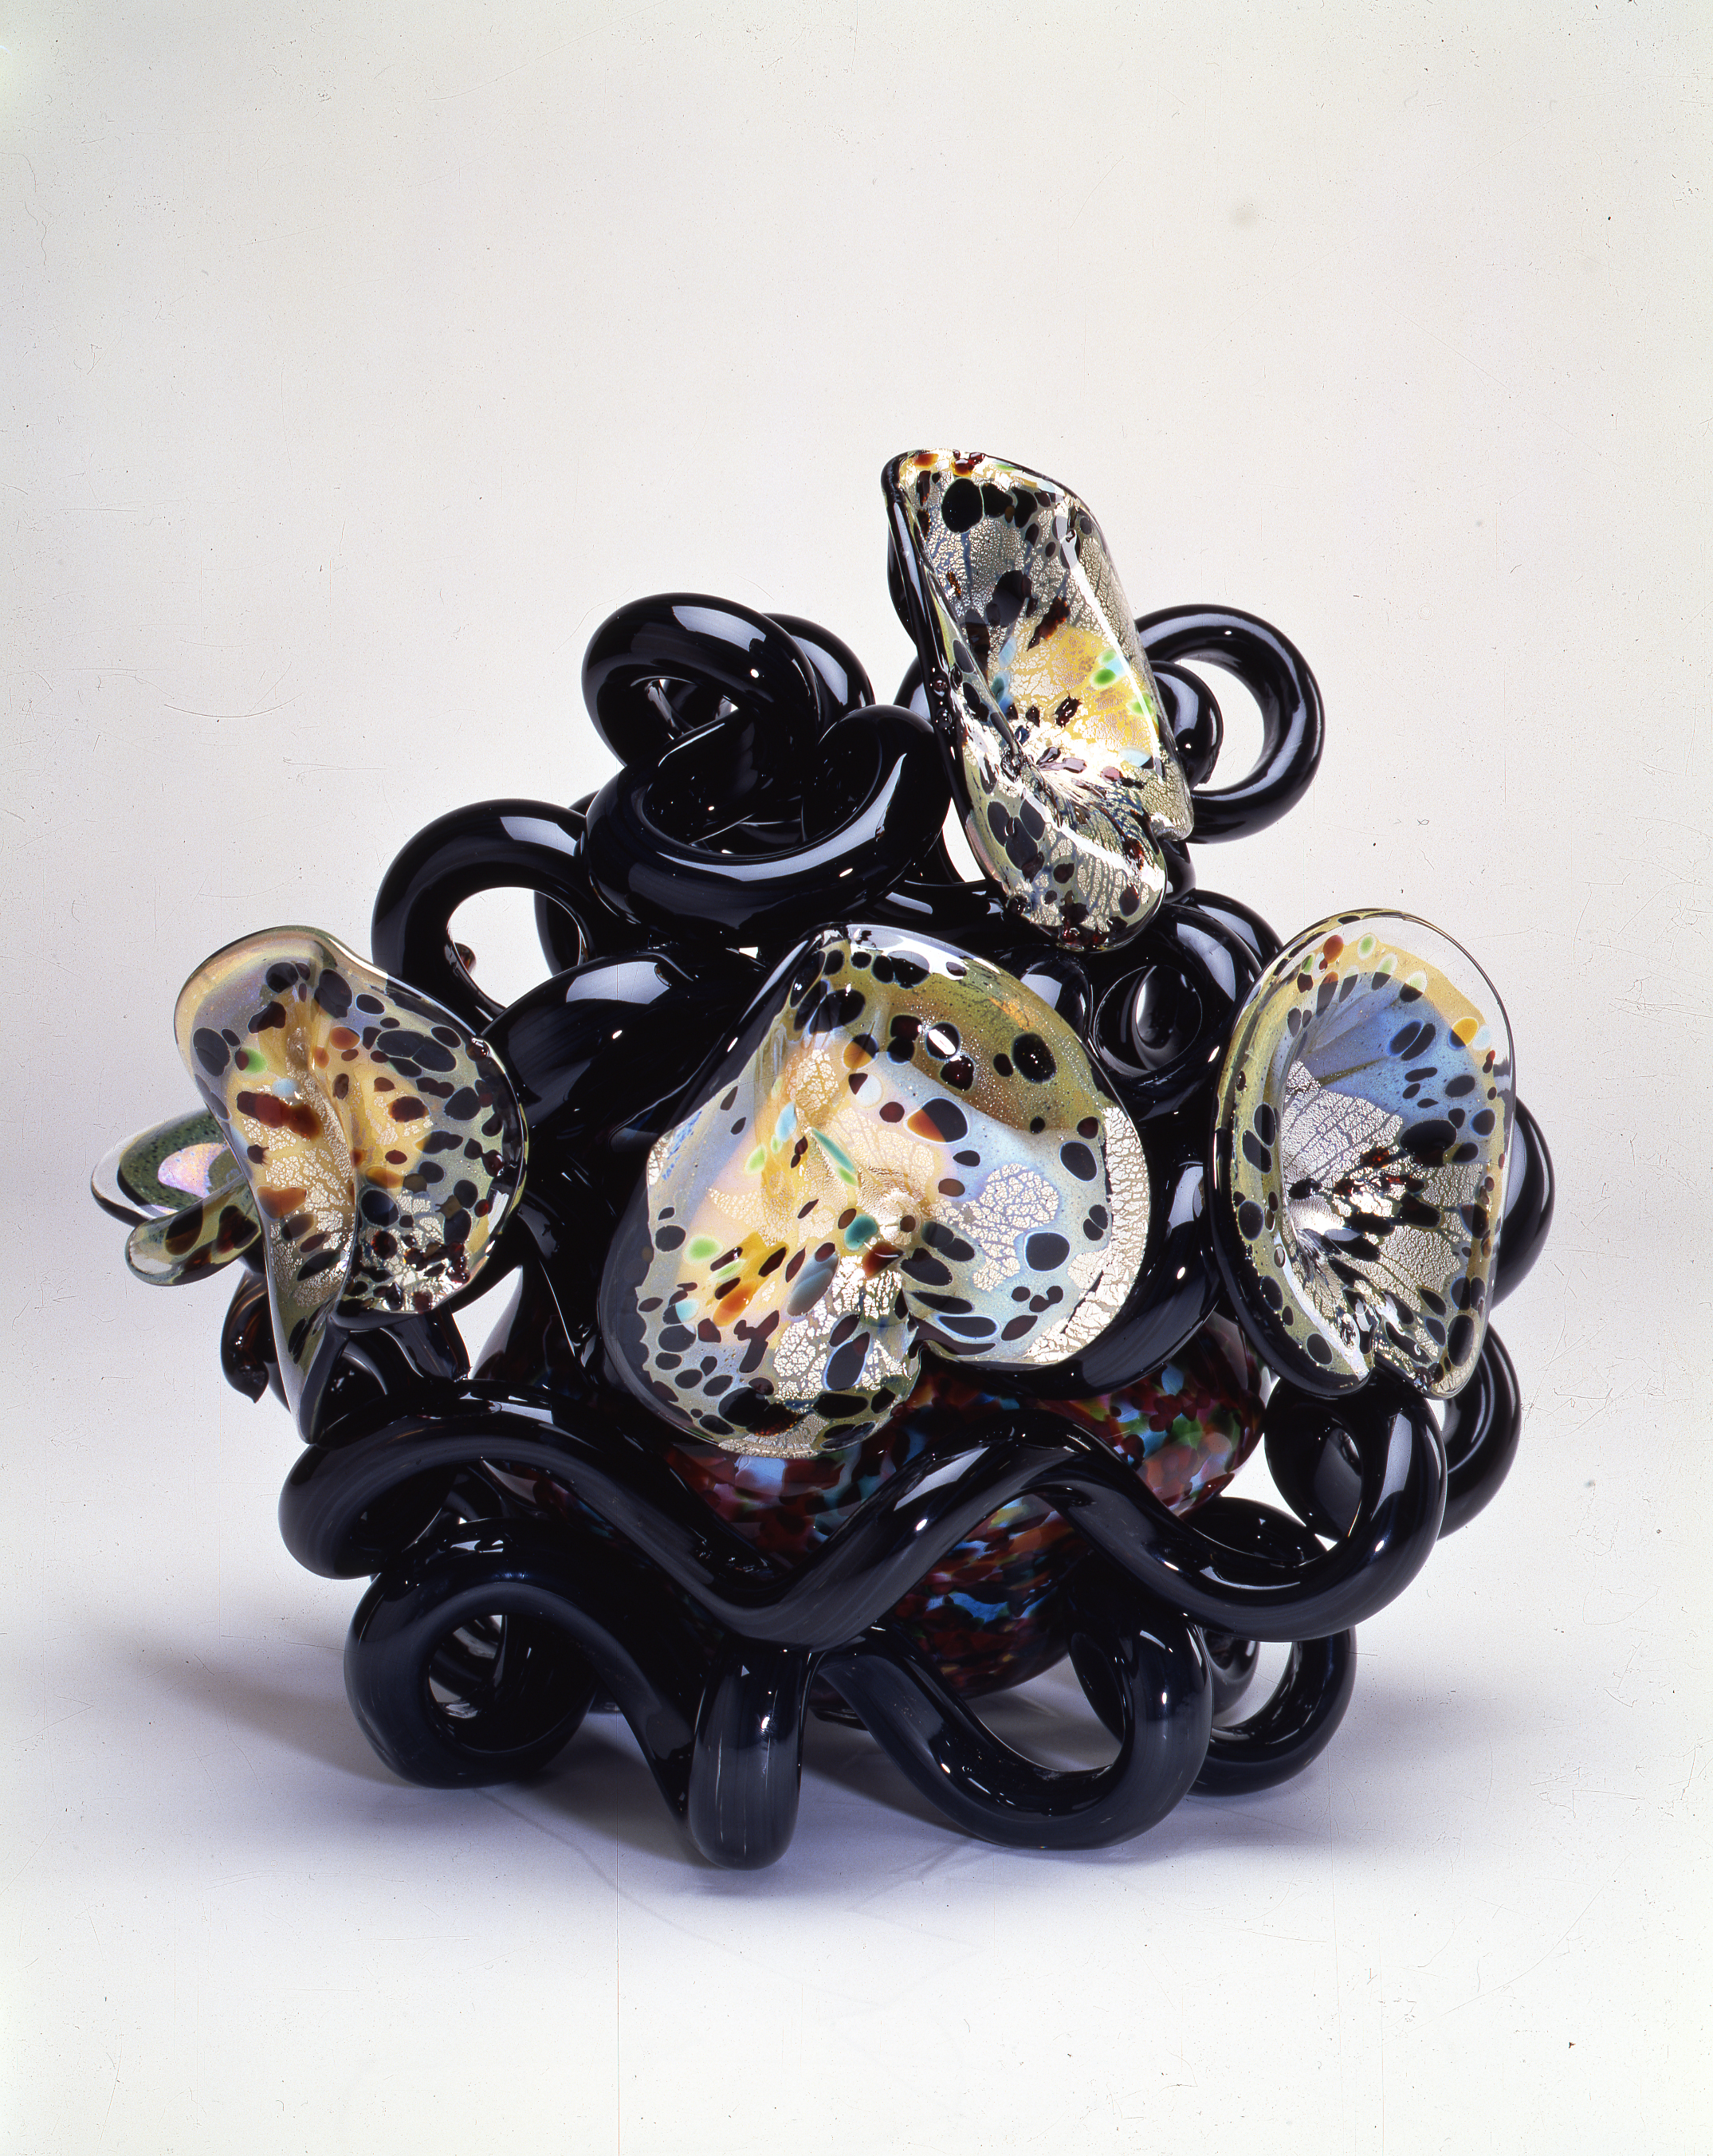  Dale Chihuly,  Black Coiled Venetian with Lilies&nbsp; (1991, glass, 18 x 21 x 18 inches) 